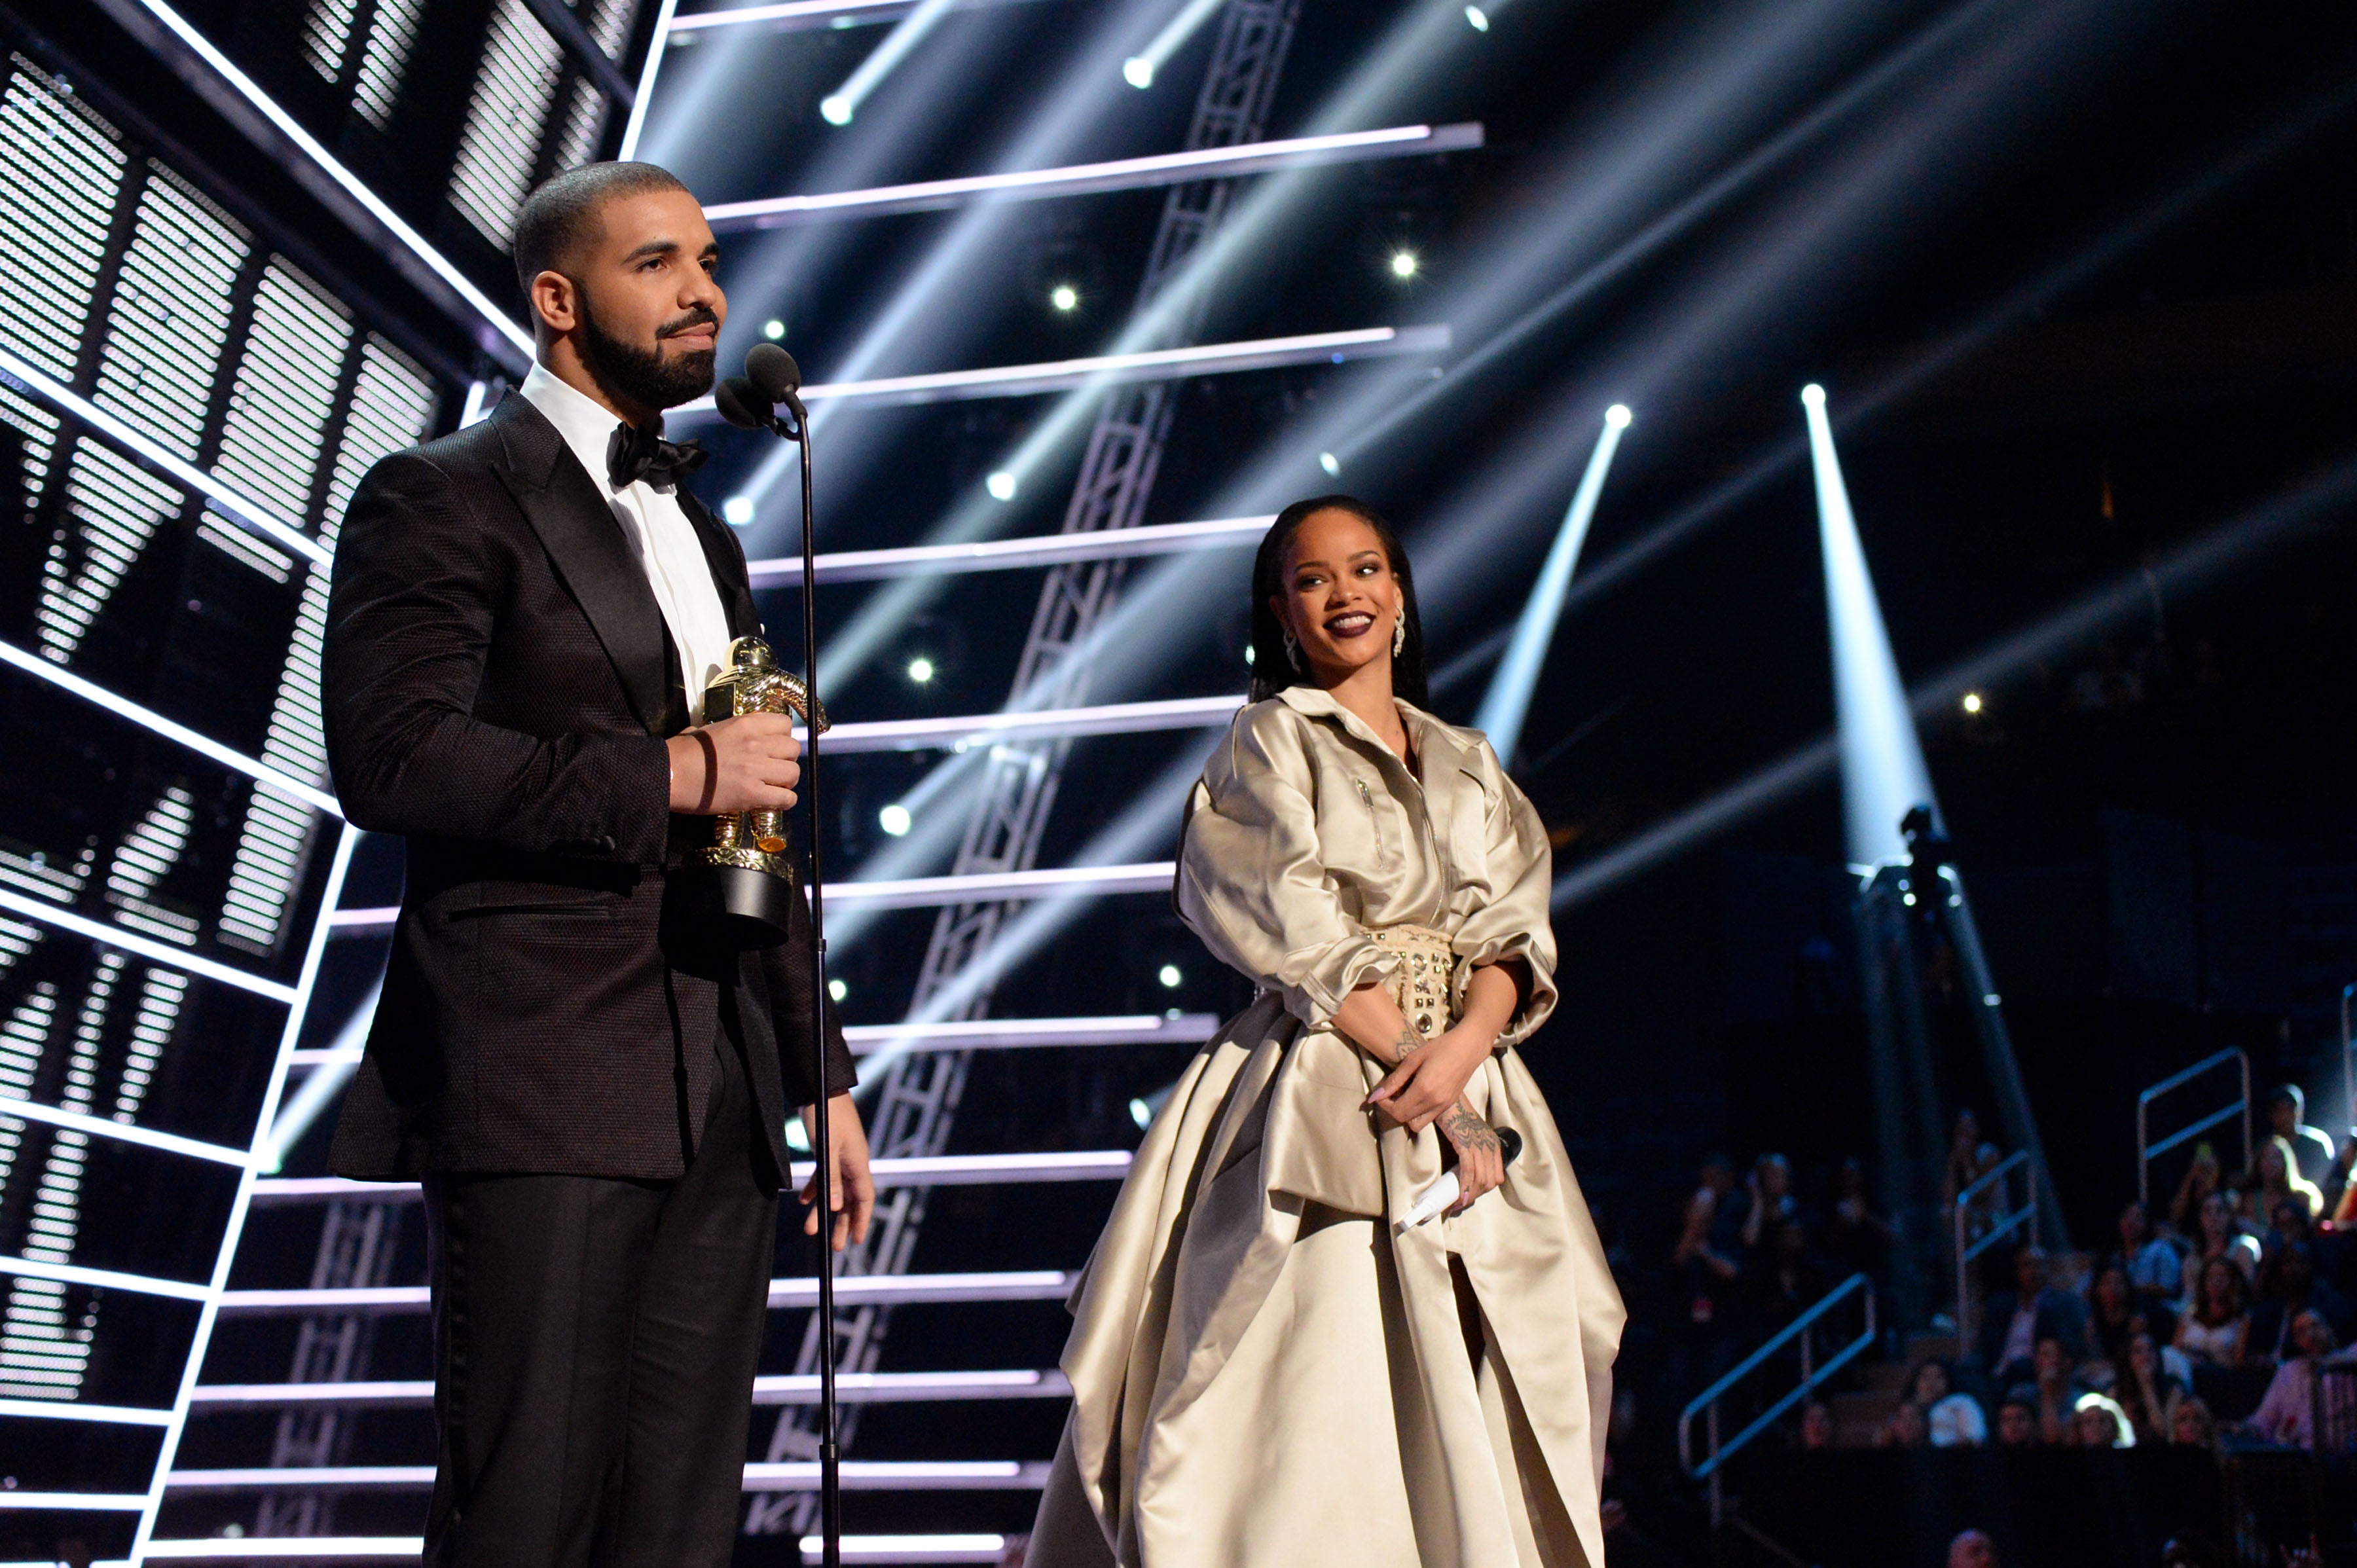 Rihanna Admits That Drake's Declaration Of Love For Her In VMA Speech Made Her Really 'Uncomfortable'
